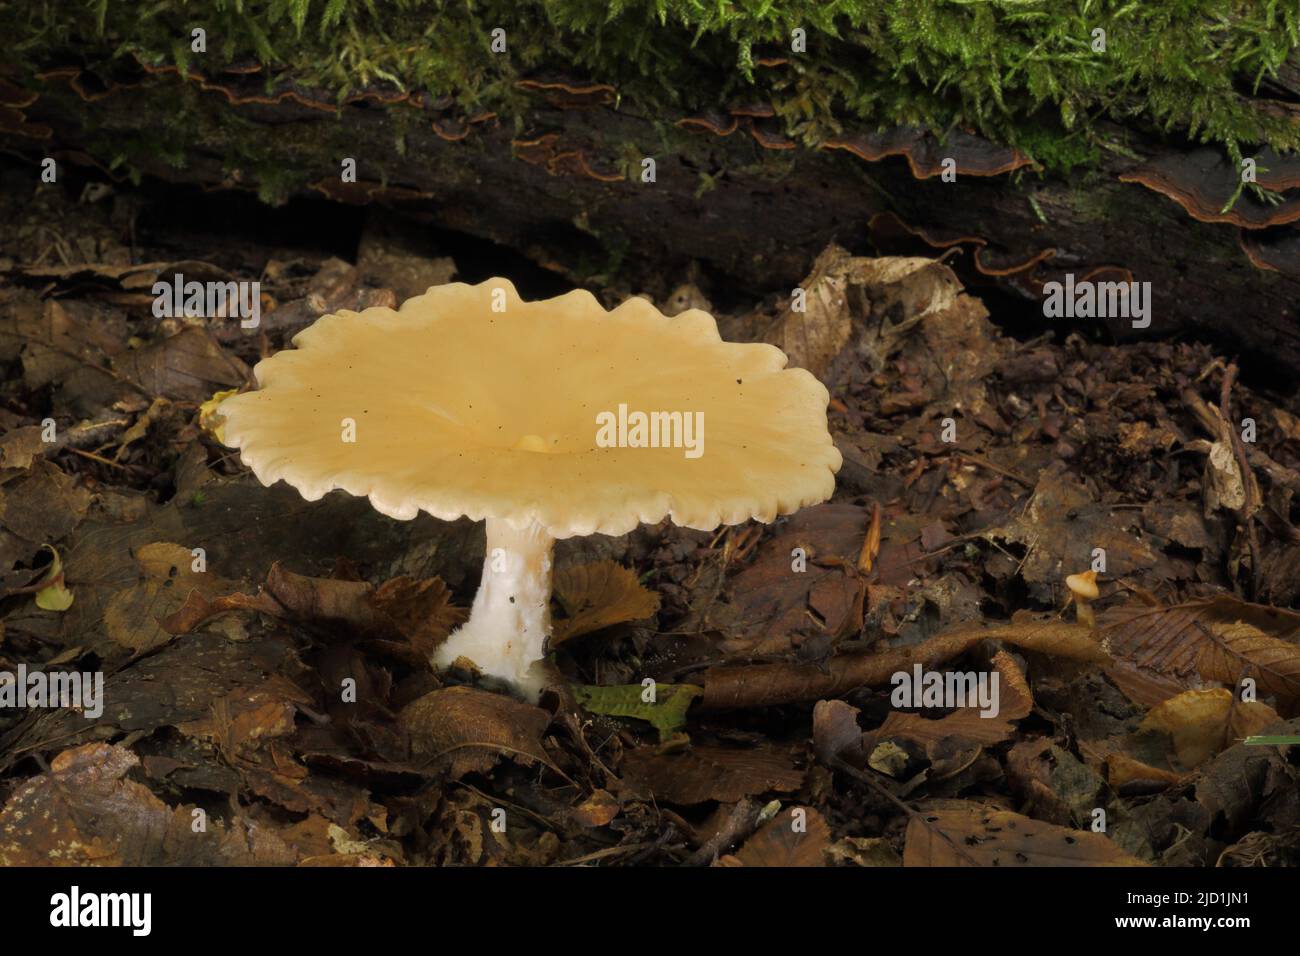 Funnel (Clitocybe costata) with wavy cap in Eppstein, Taunus, Hesse, Germany Stock Photo